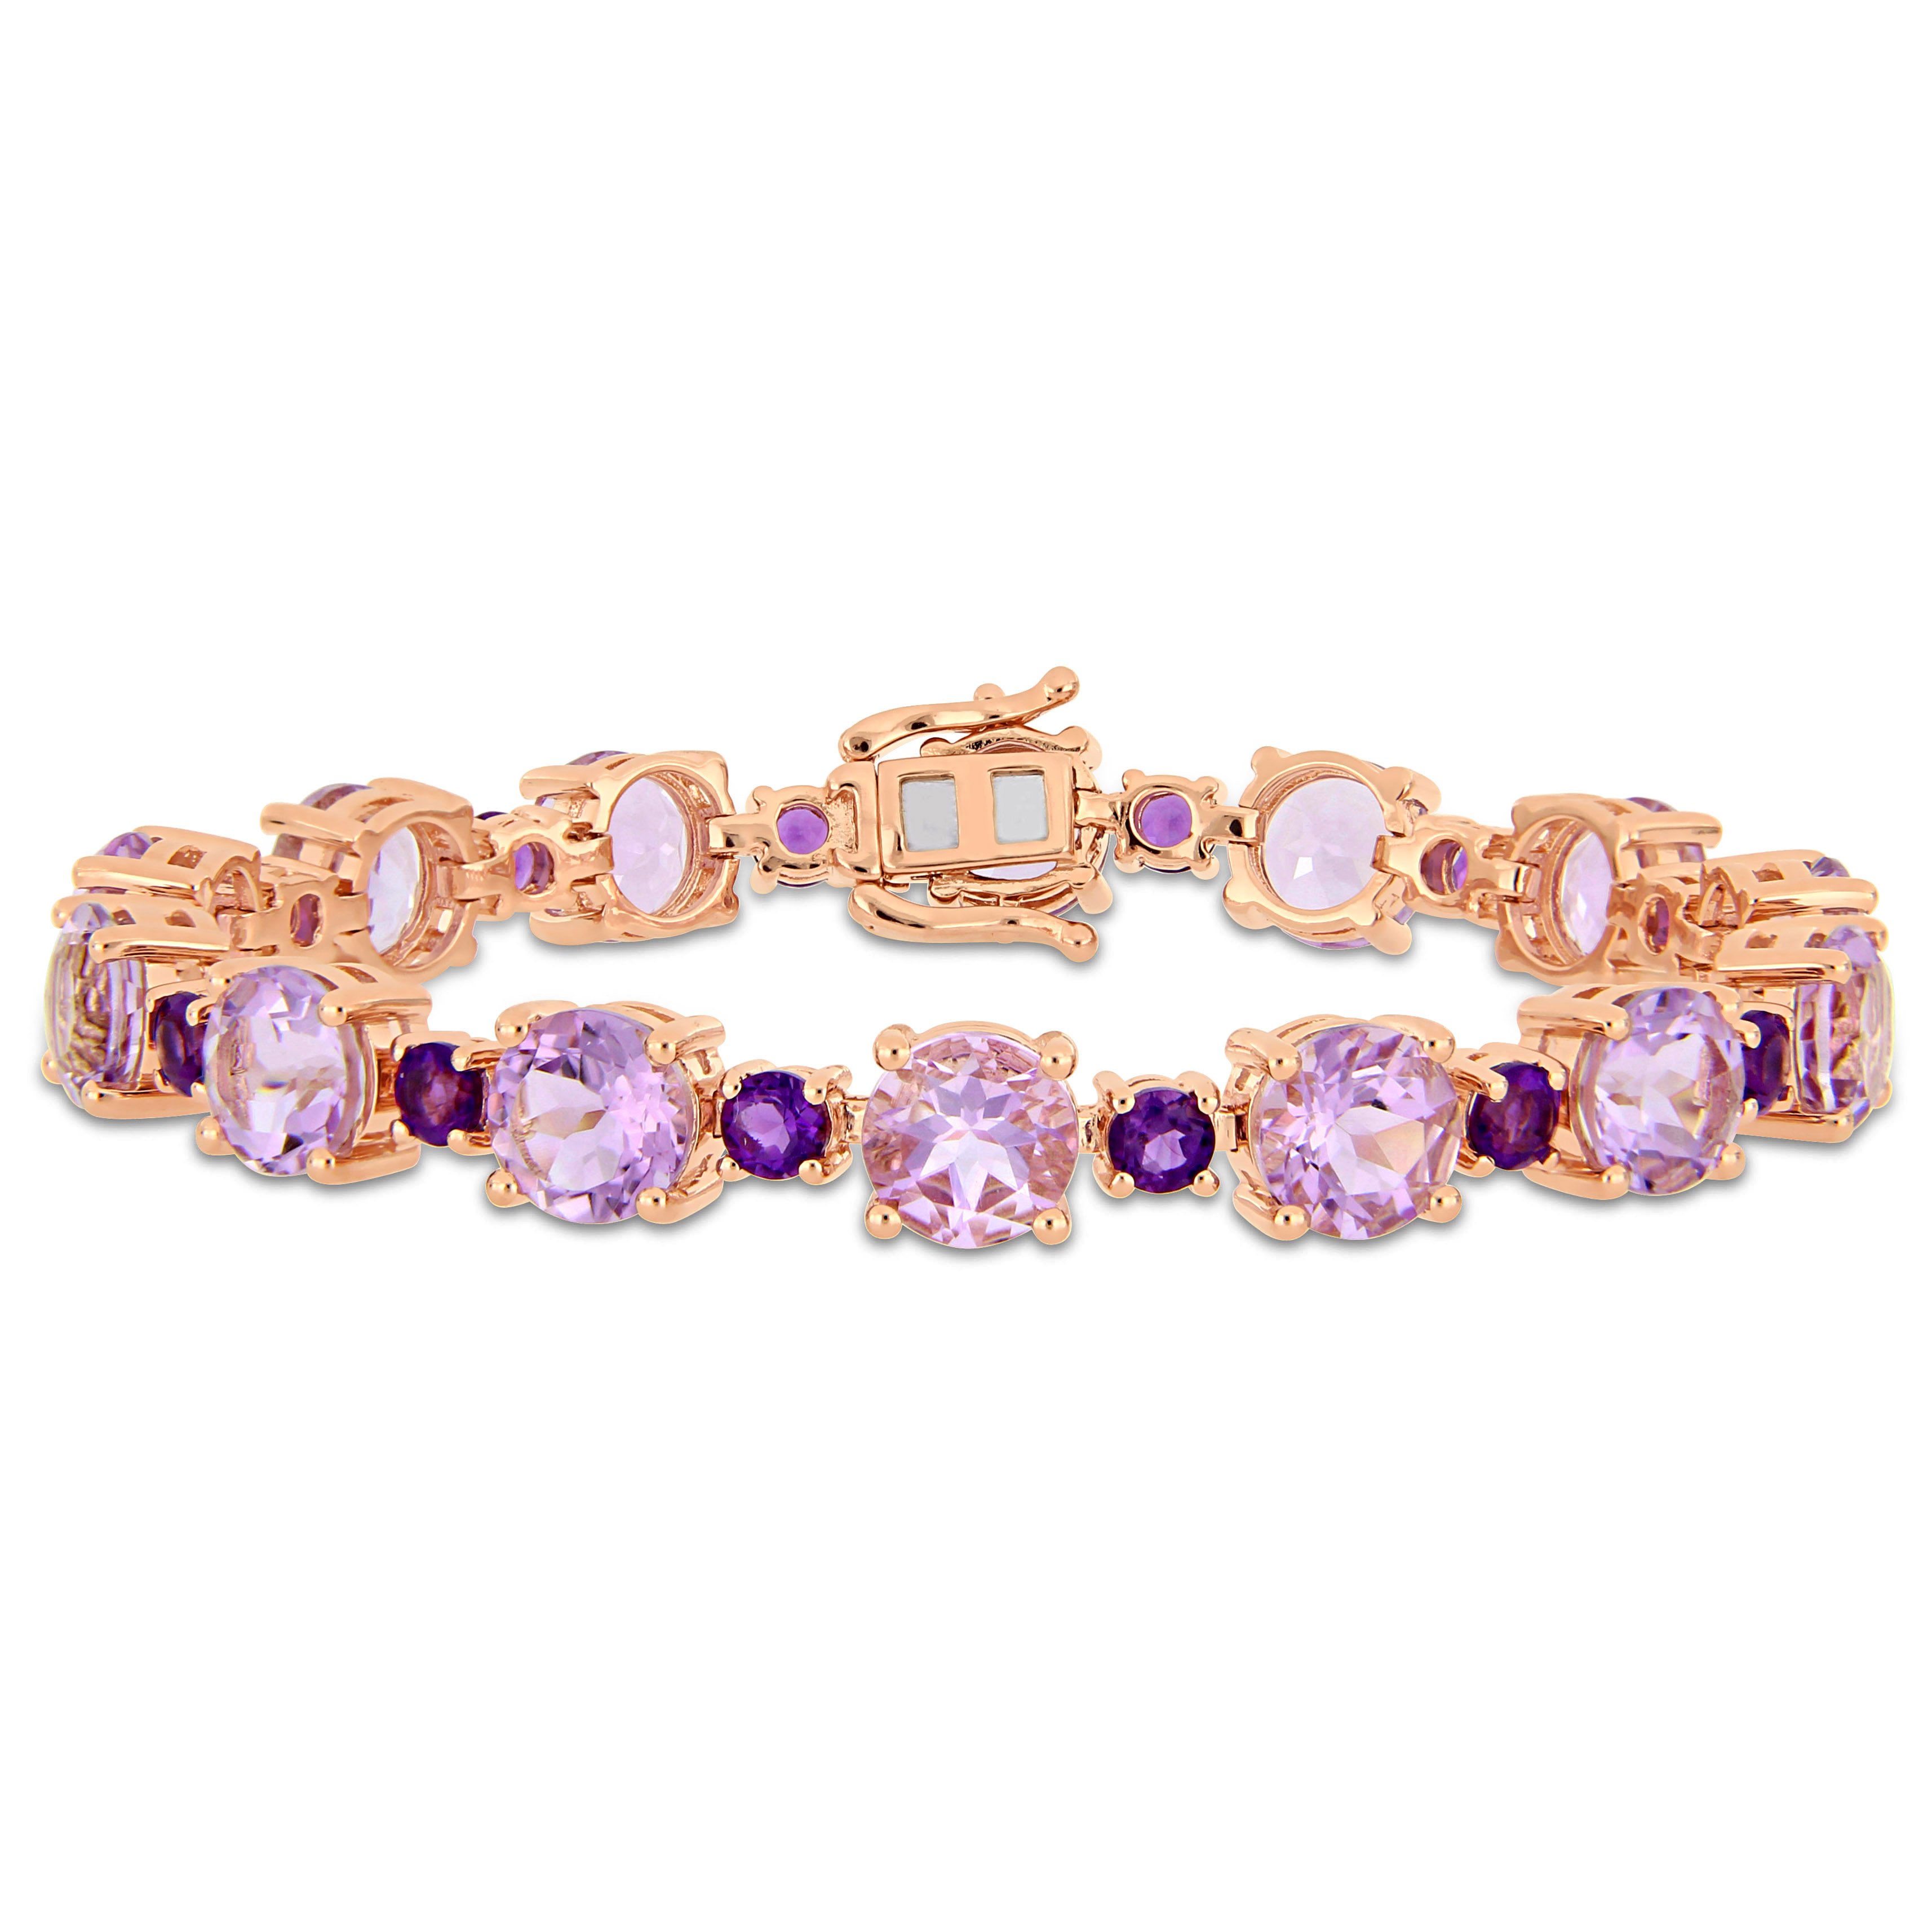 24 5/8 CT TGW Rose de France and Africa-Amethyst Tennis Bracelet in Rose Gold Plated Sterling Silver - 7.25 in.